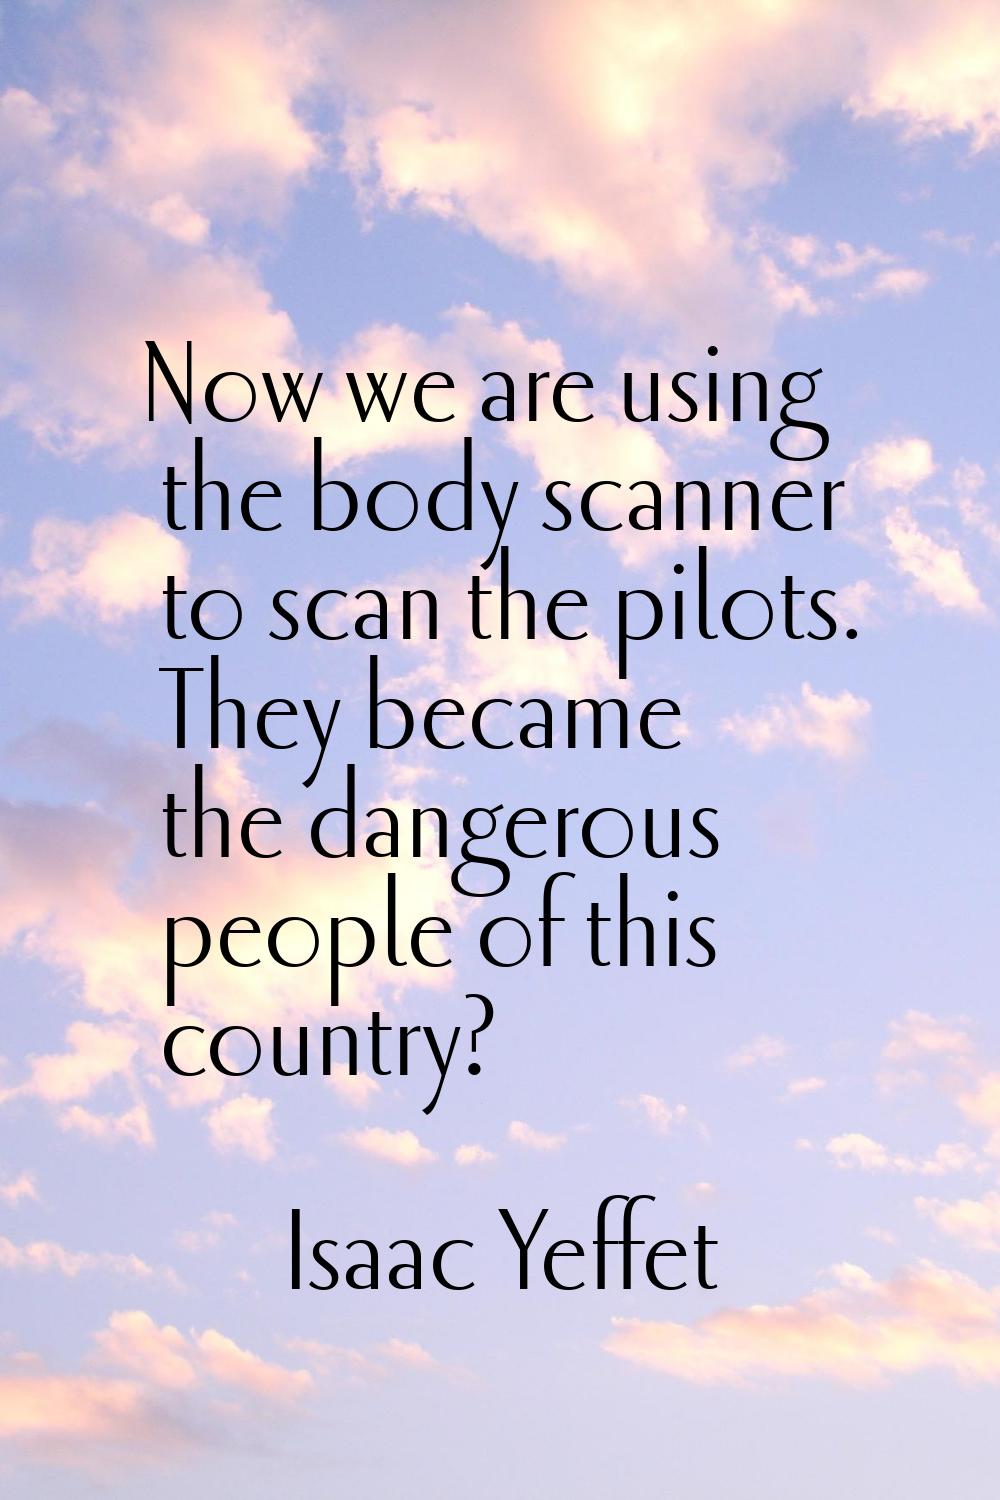 Now we are using the body scanner to scan the pilots. They became the dangerous people of this coun